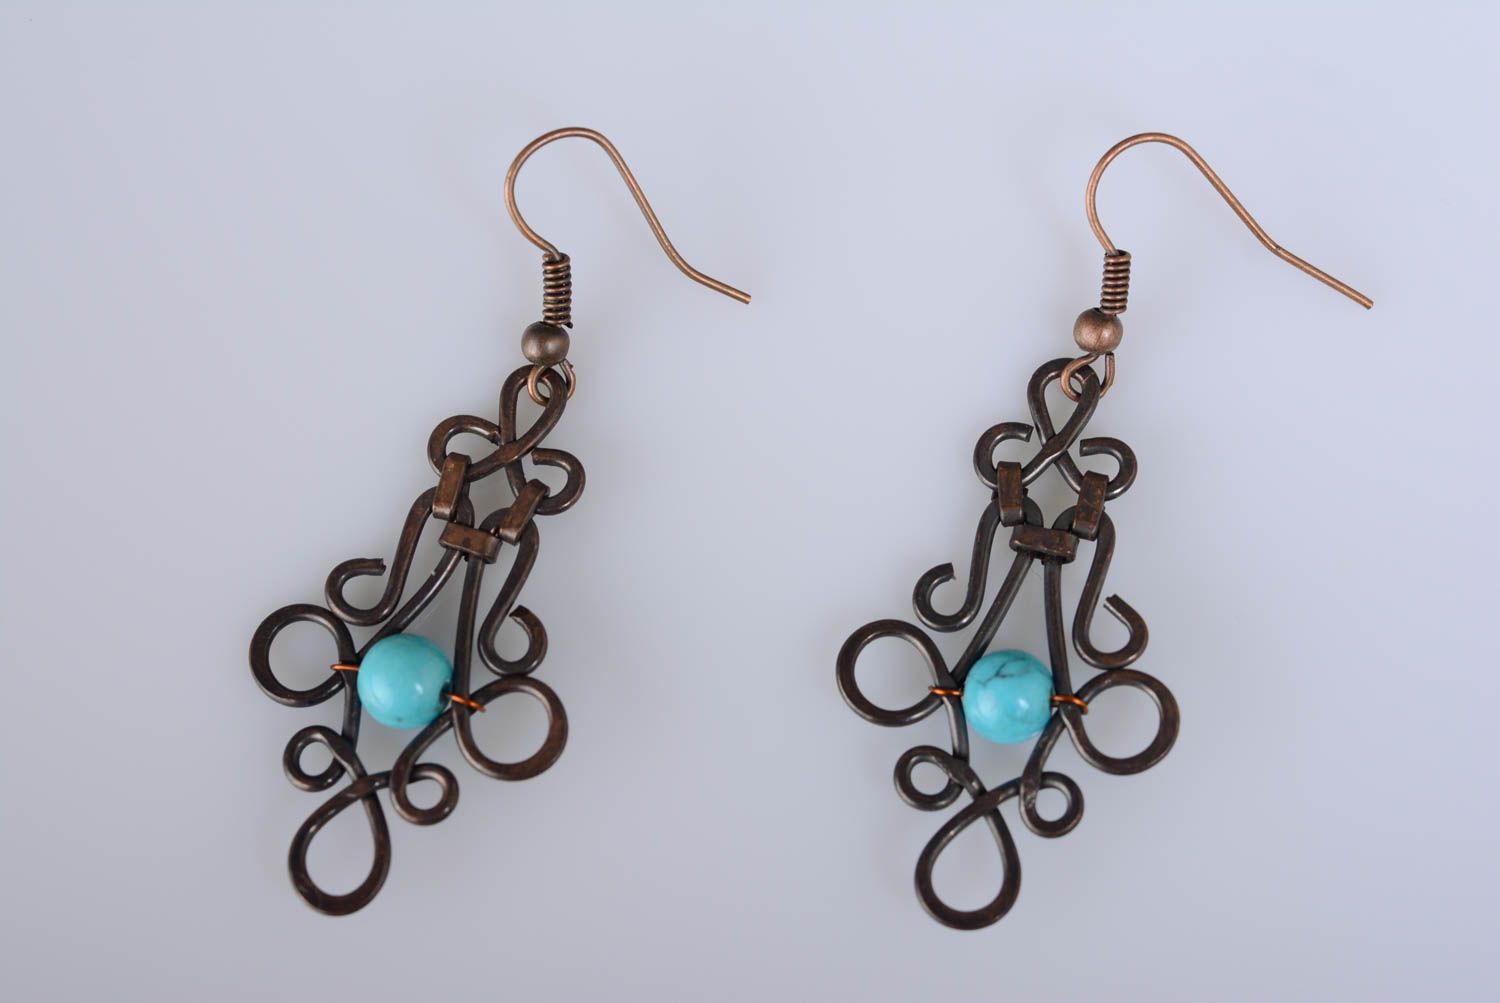 Massive earrings made of copper using wire wrap technique with artificial turquoise photo 3